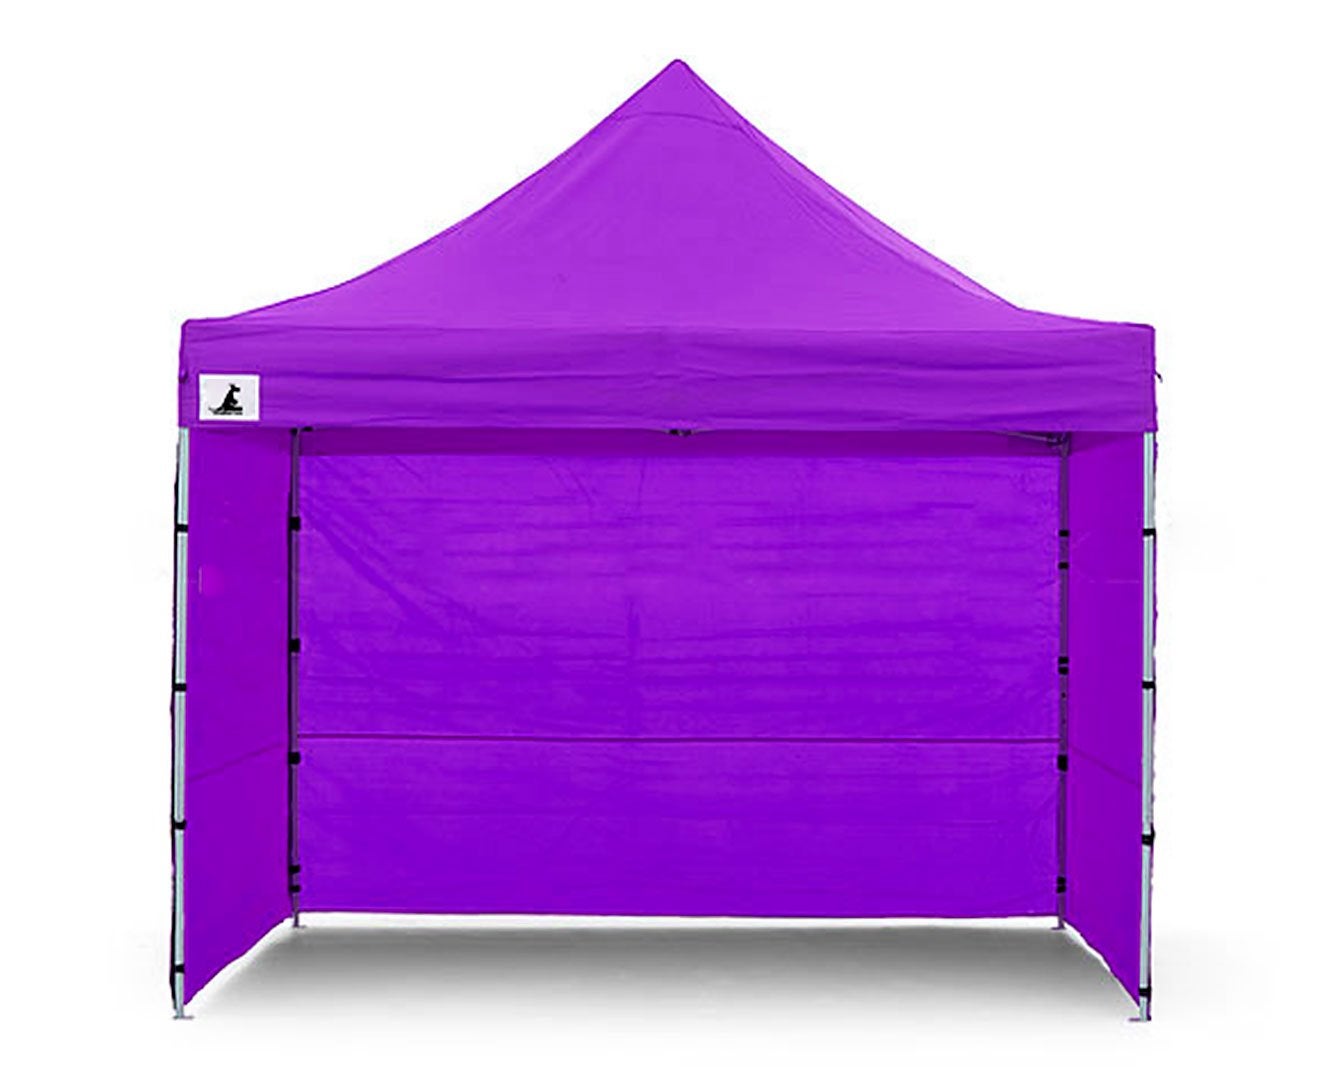 3m x 3m Wallaroo Pop Up Outdoor Gazebo Folding Tent Party Marquee Canopy